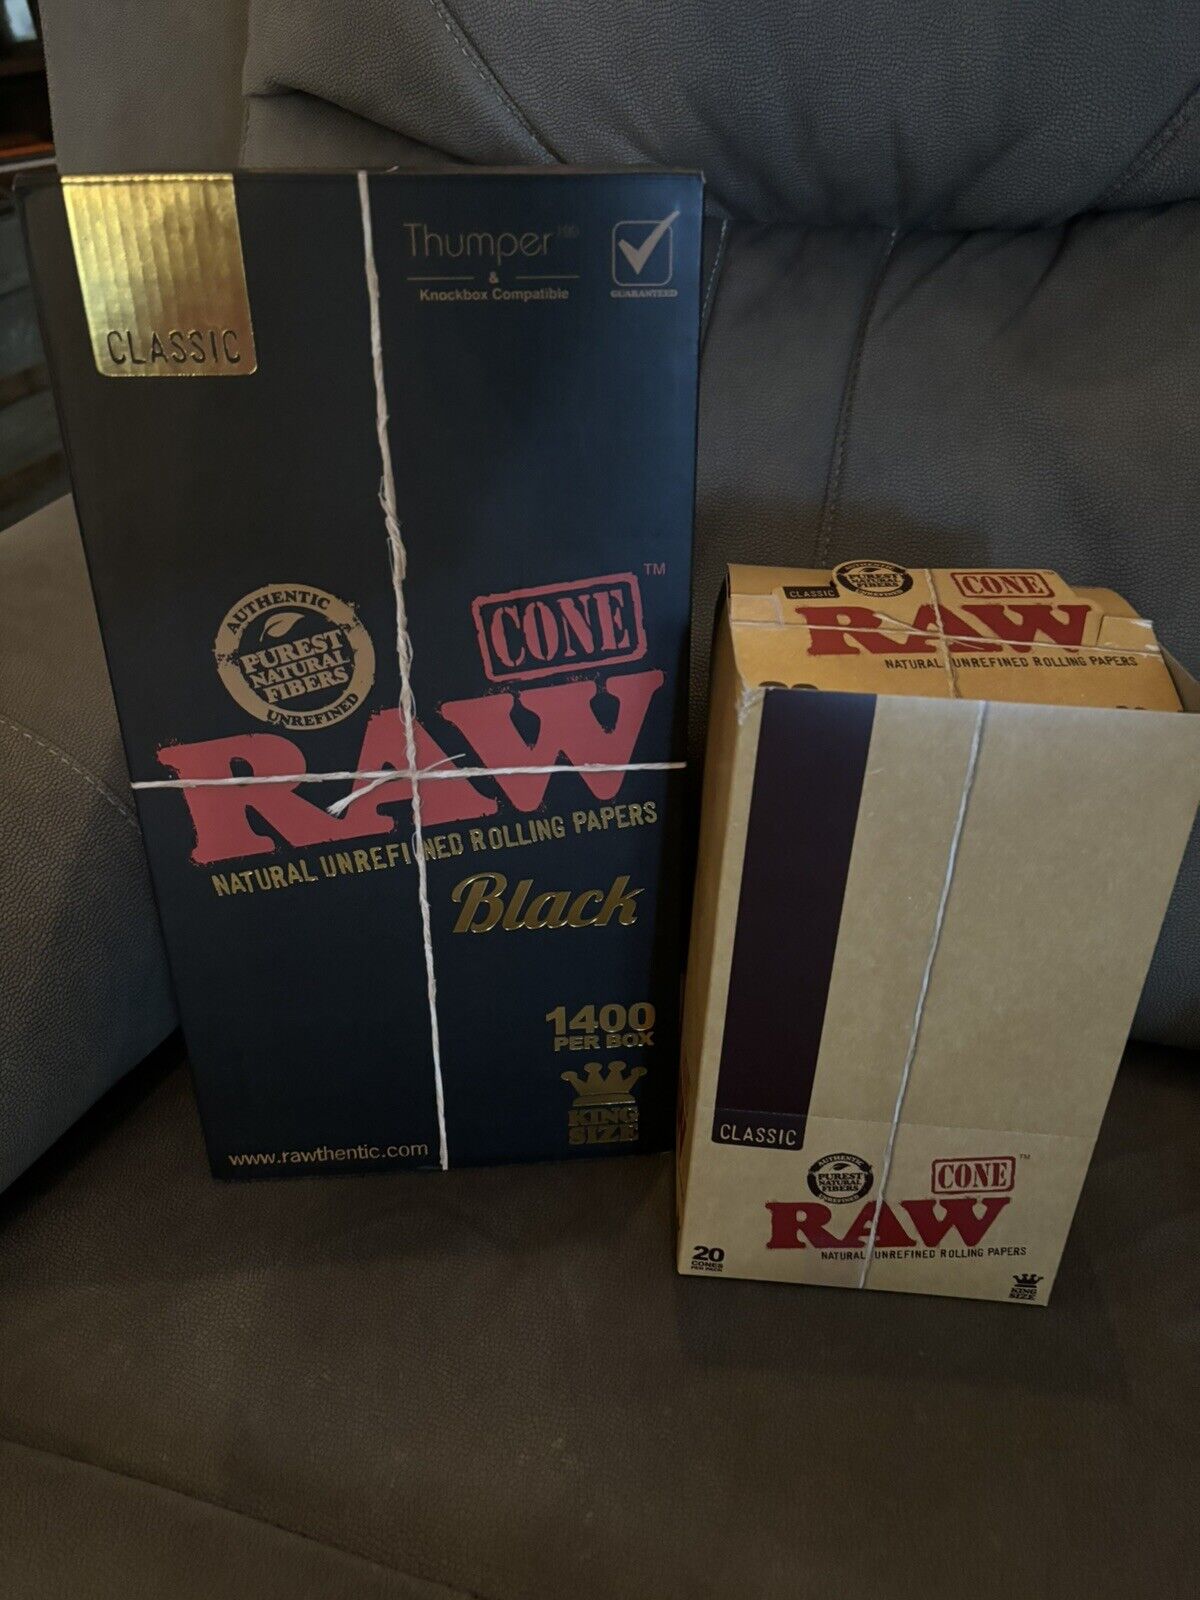 RAW Cone Black Rolling Papers King Size 1400 Box + RAW Cone King Size 240 Pack